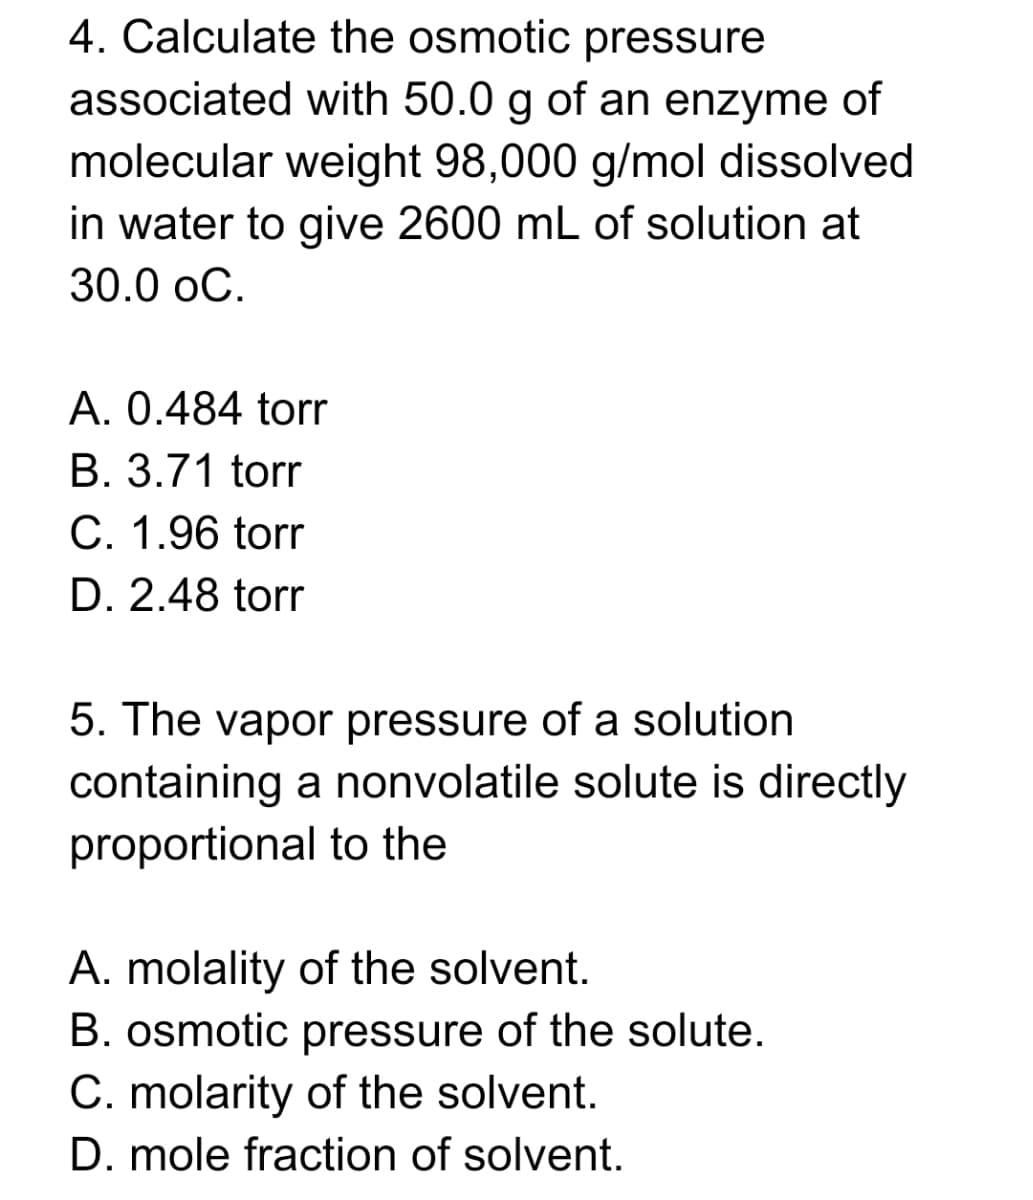 4. Calculate the osmotic pressure
associated with 50.0 g of an enzyme of
molecular weight 98,000 g/mol dissolved
in water to give 2600 mL of solution at
30.0 oC.
A. 0.484 torr
B. 3.71 torr
C. 1.96 torr
D. 2.48 torr
5. The vapor pressure of a solution
containing a nonvolatile solute is directly
proportional to the
A. molality of the solvent.
B. osmotic pressure of the solute.
C. molarity of the solvent.
D. mole fraction of solvent.
